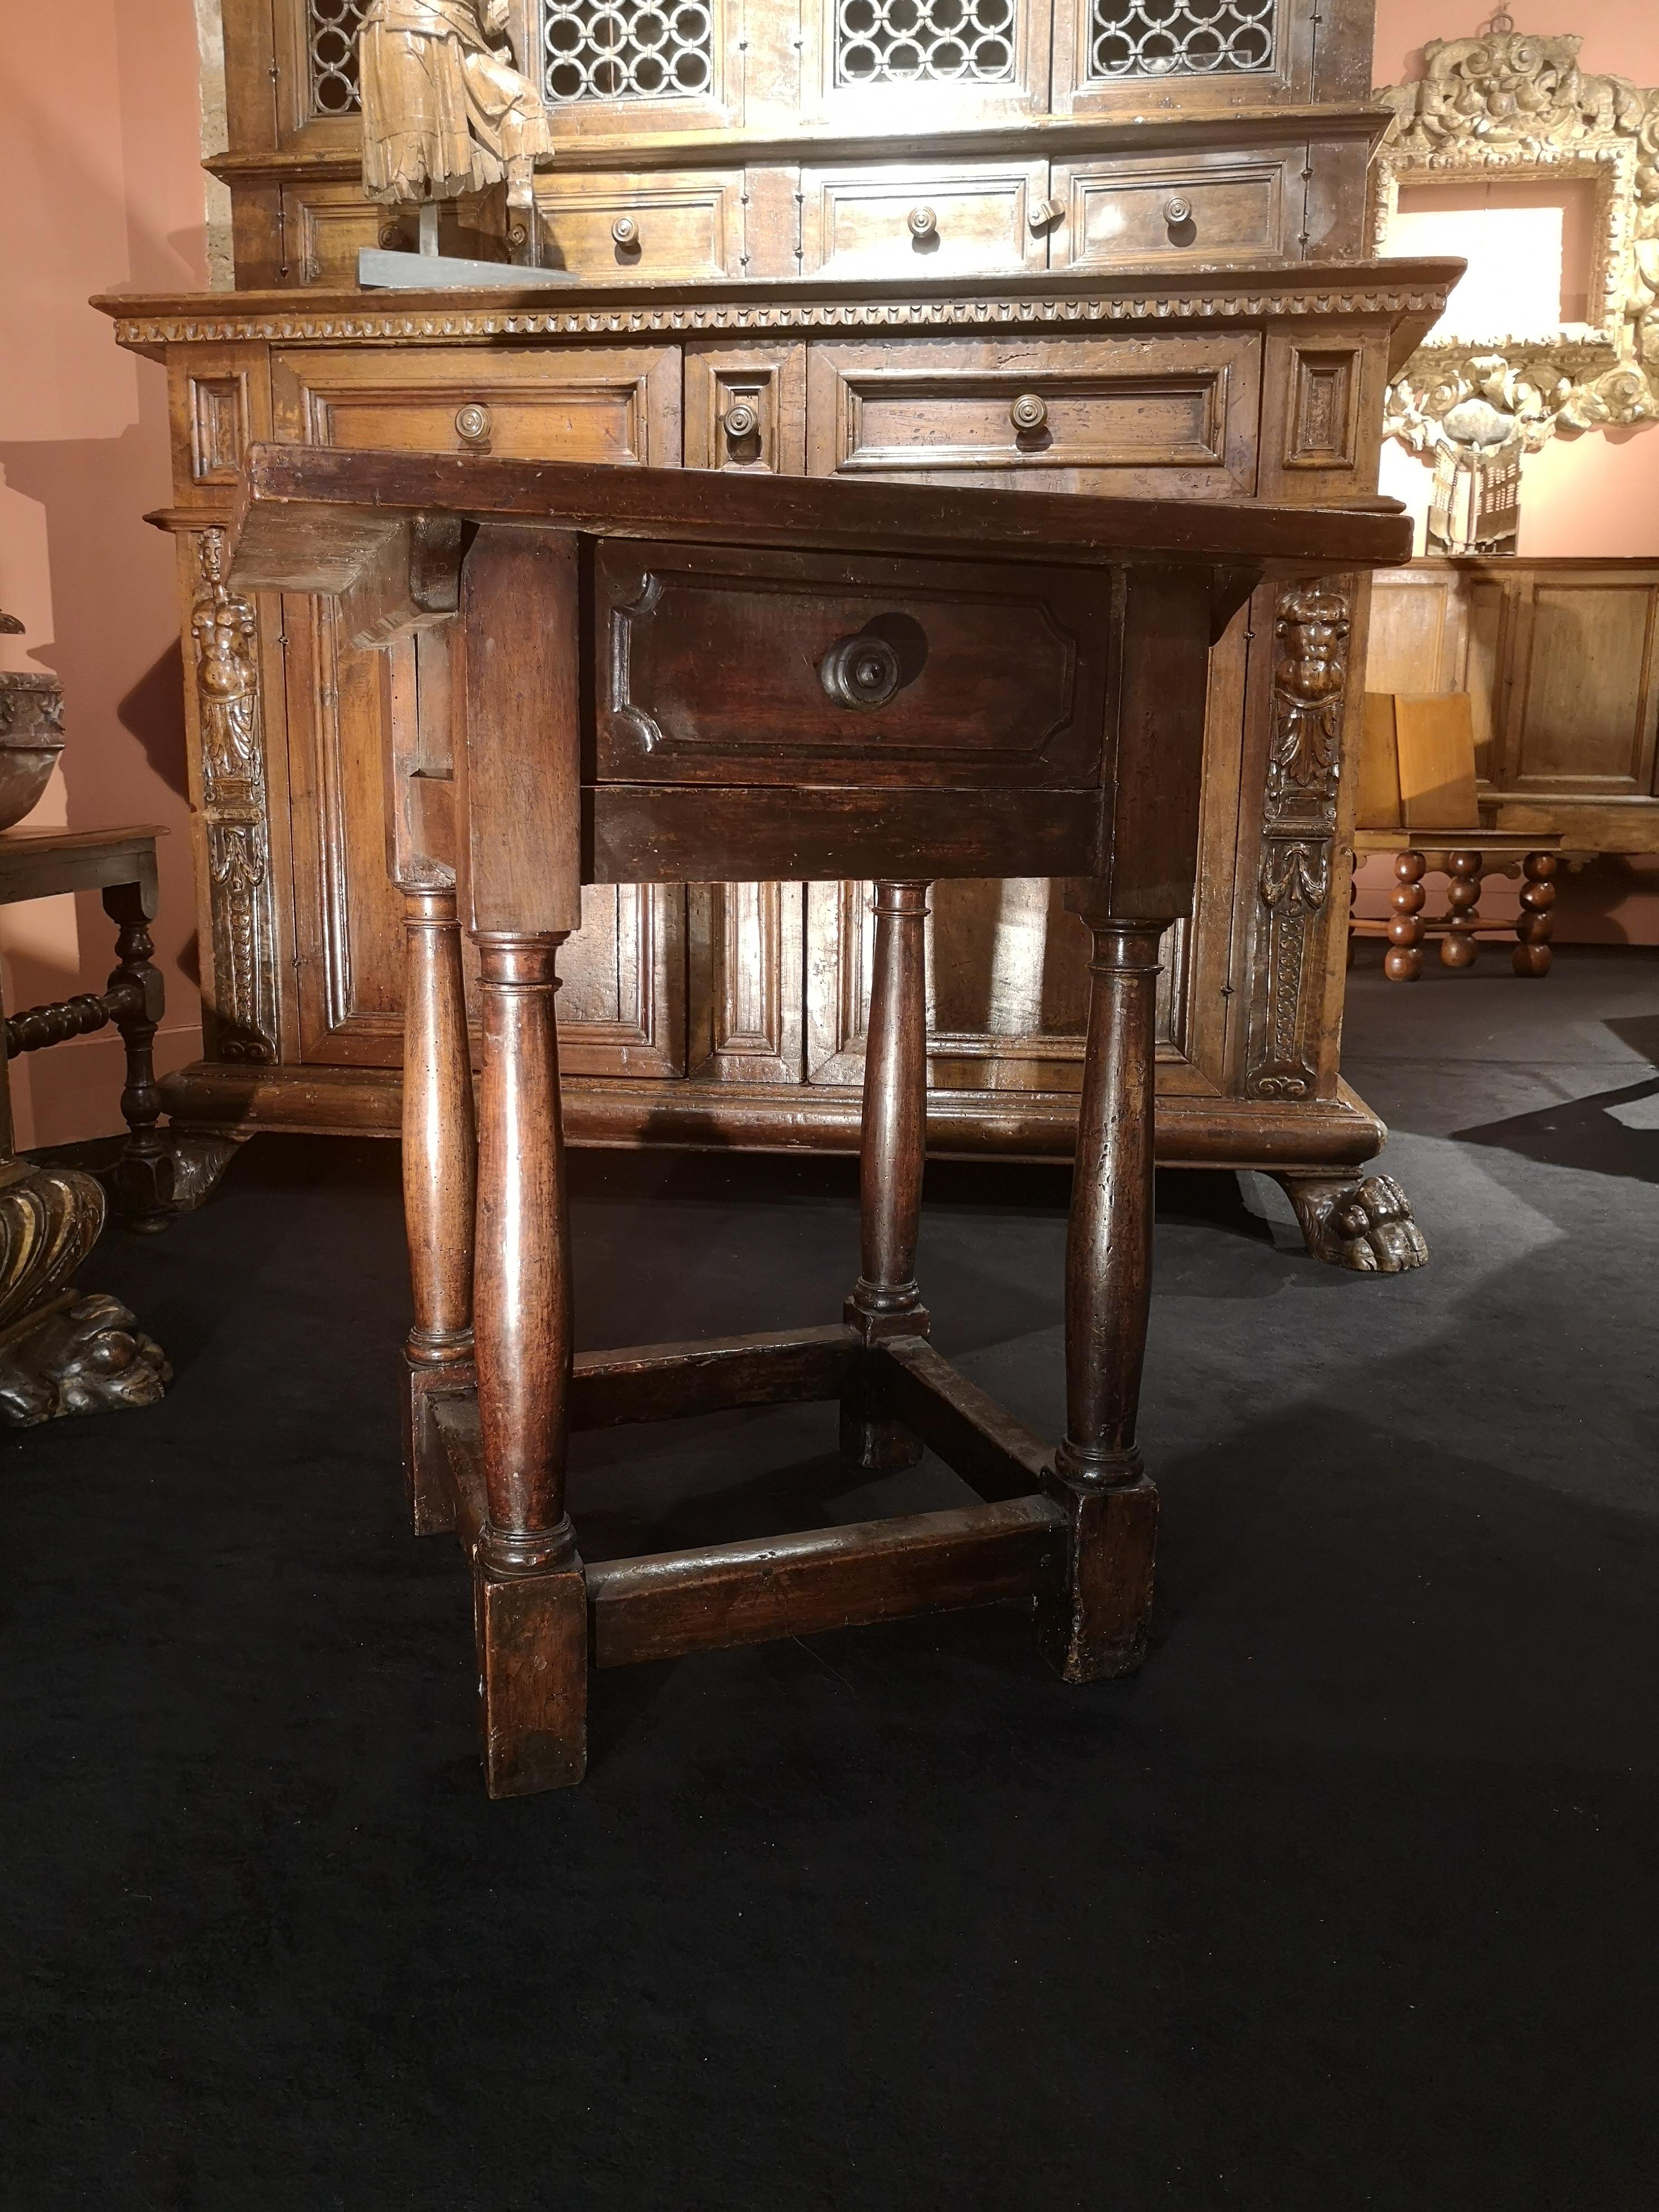 SMALL TUSCANY TABLE FROM THE RENAISSANCE PERIOD

ORIGIN : FLORENCE, ITALY
PERIOD : 16th CENTURY

Height:  69,4 cm			
Length:  59,4 cm			
Depth:  51 cm	

Good state of conservation
Dark walnut wood

This table rests on four columns rising on